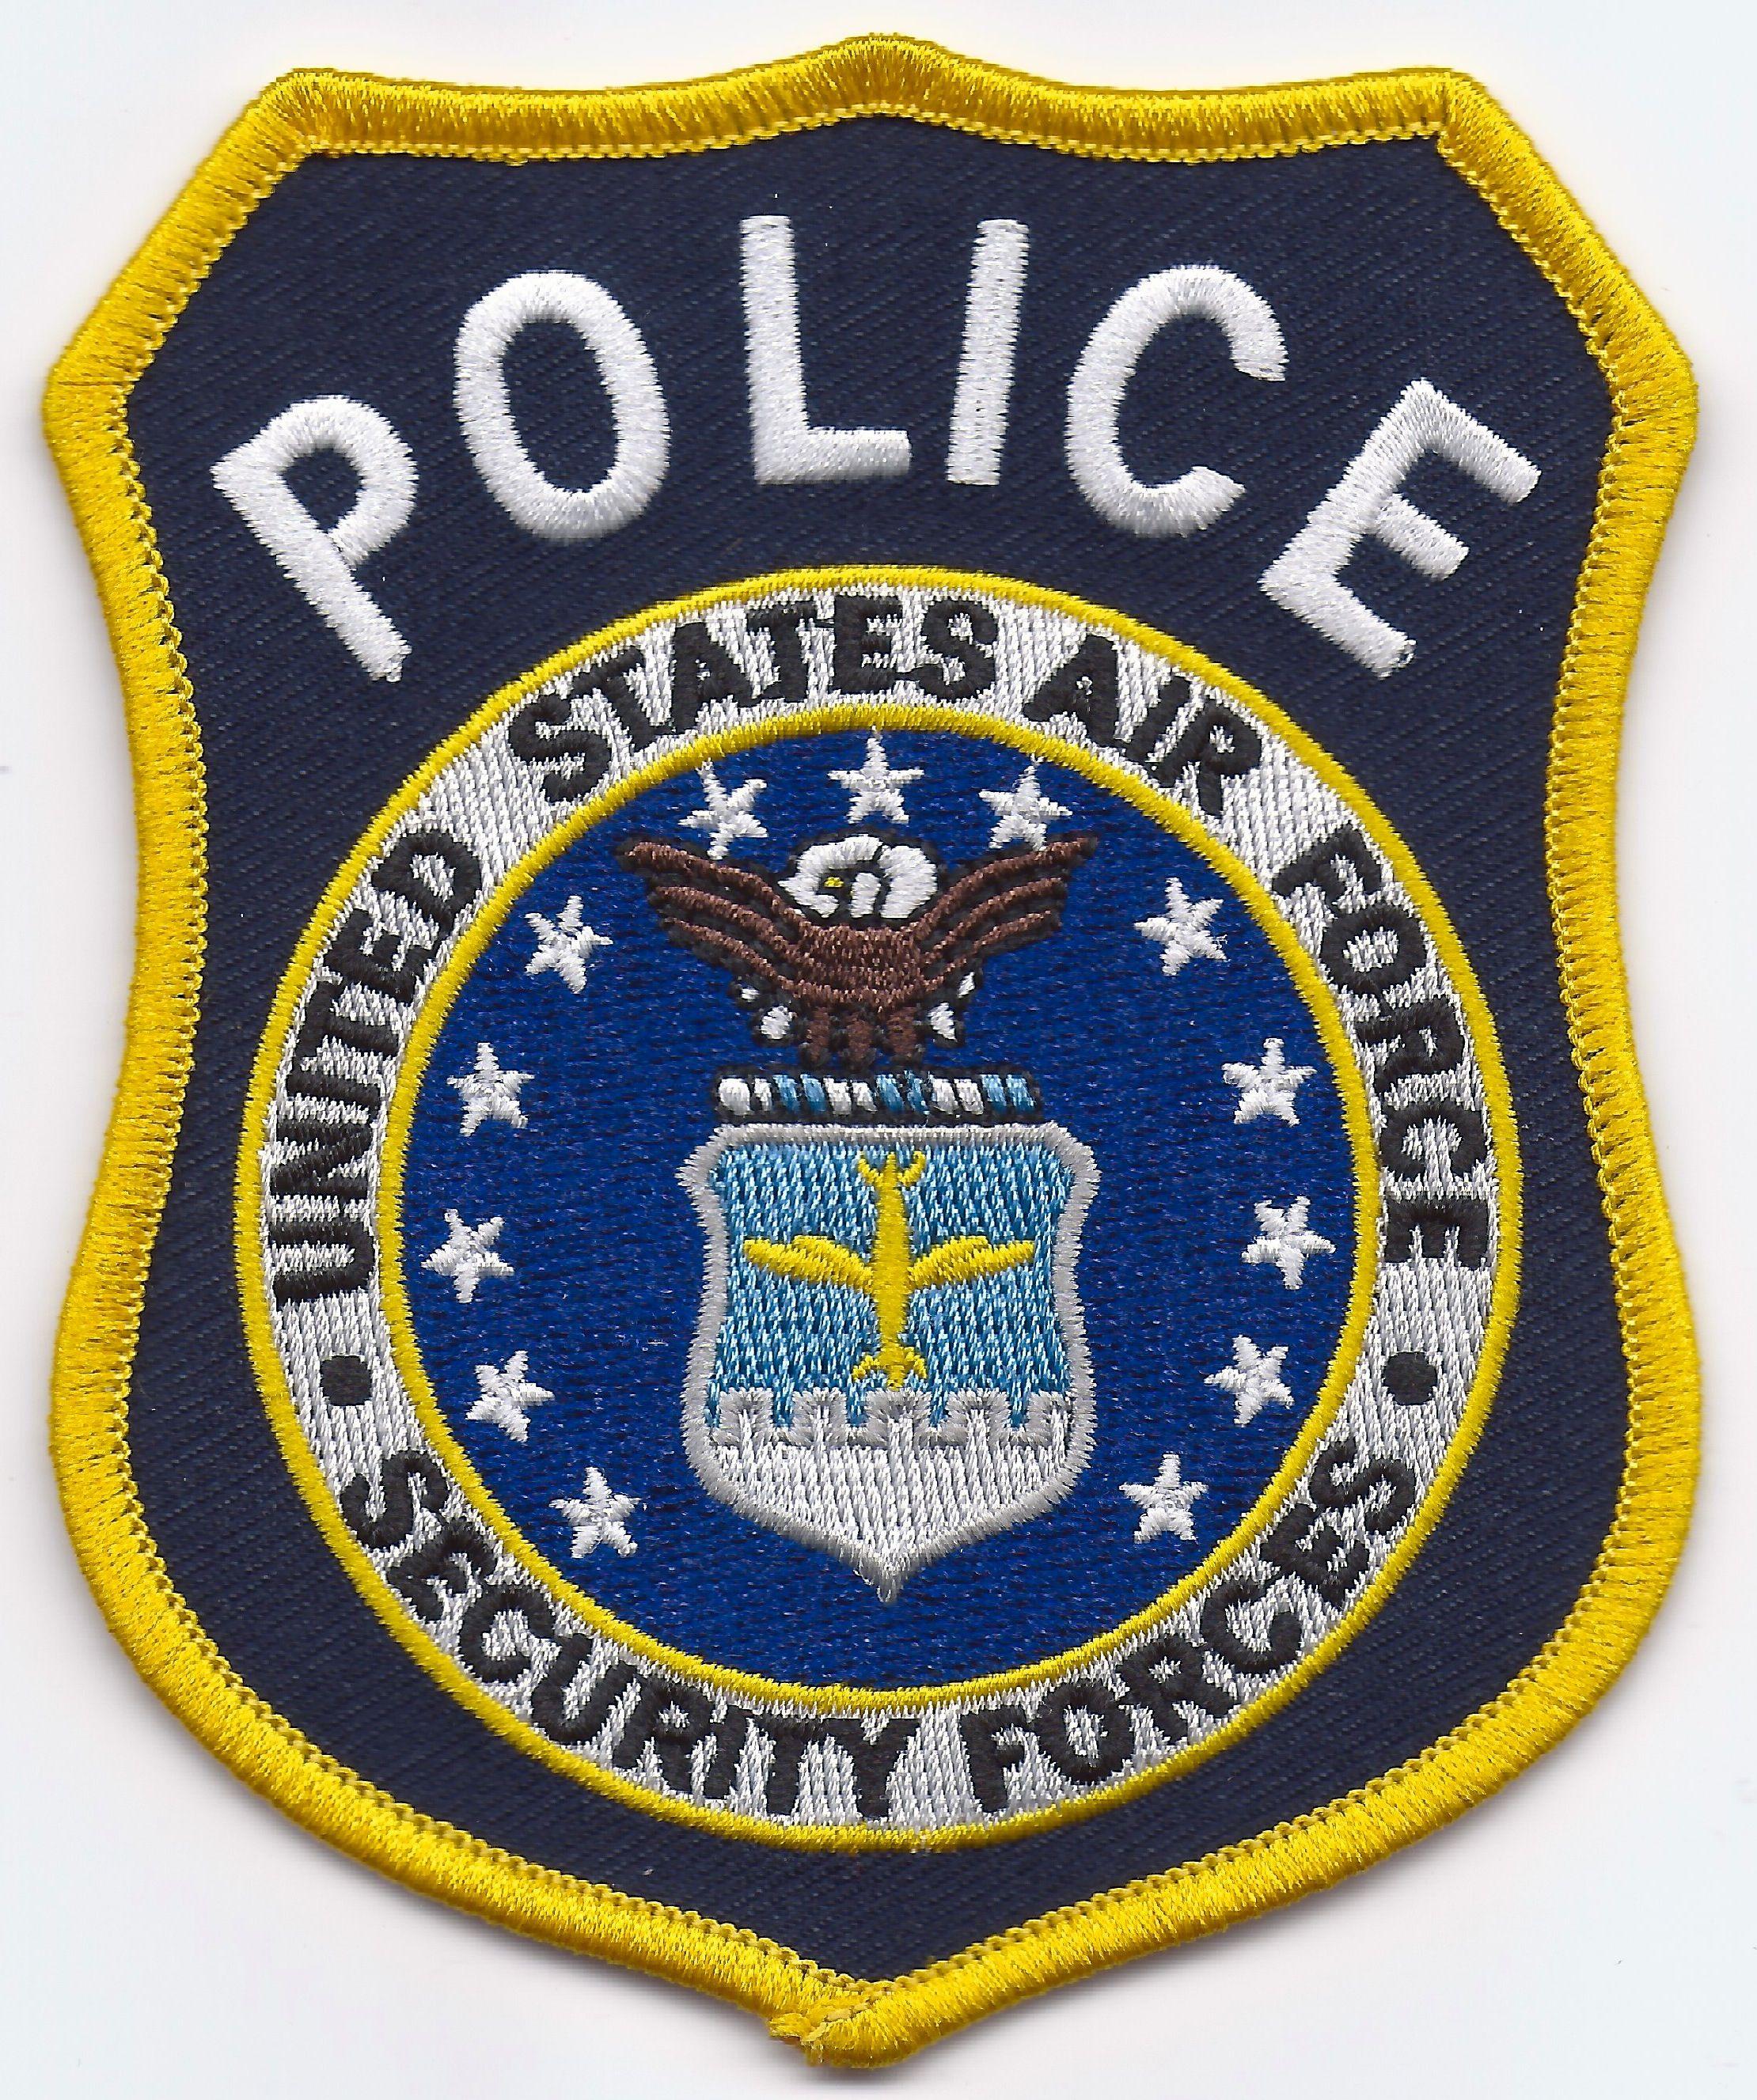 The Department of Air Force Logo - File:United States Air Force Security Forces Police Patch.jpeg ...